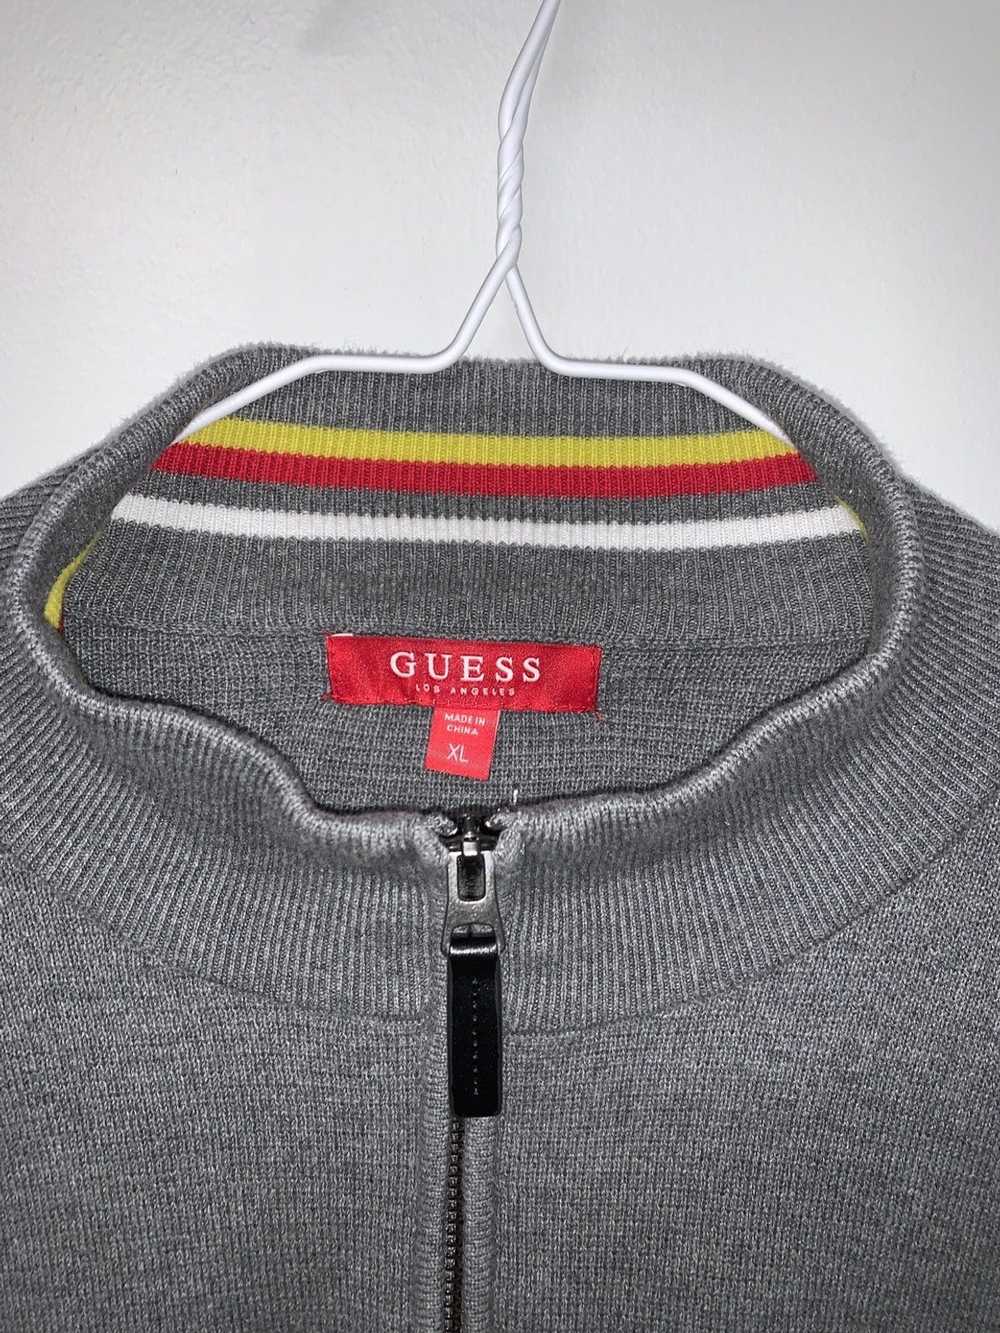 Guess Guess x Vintage - image 4